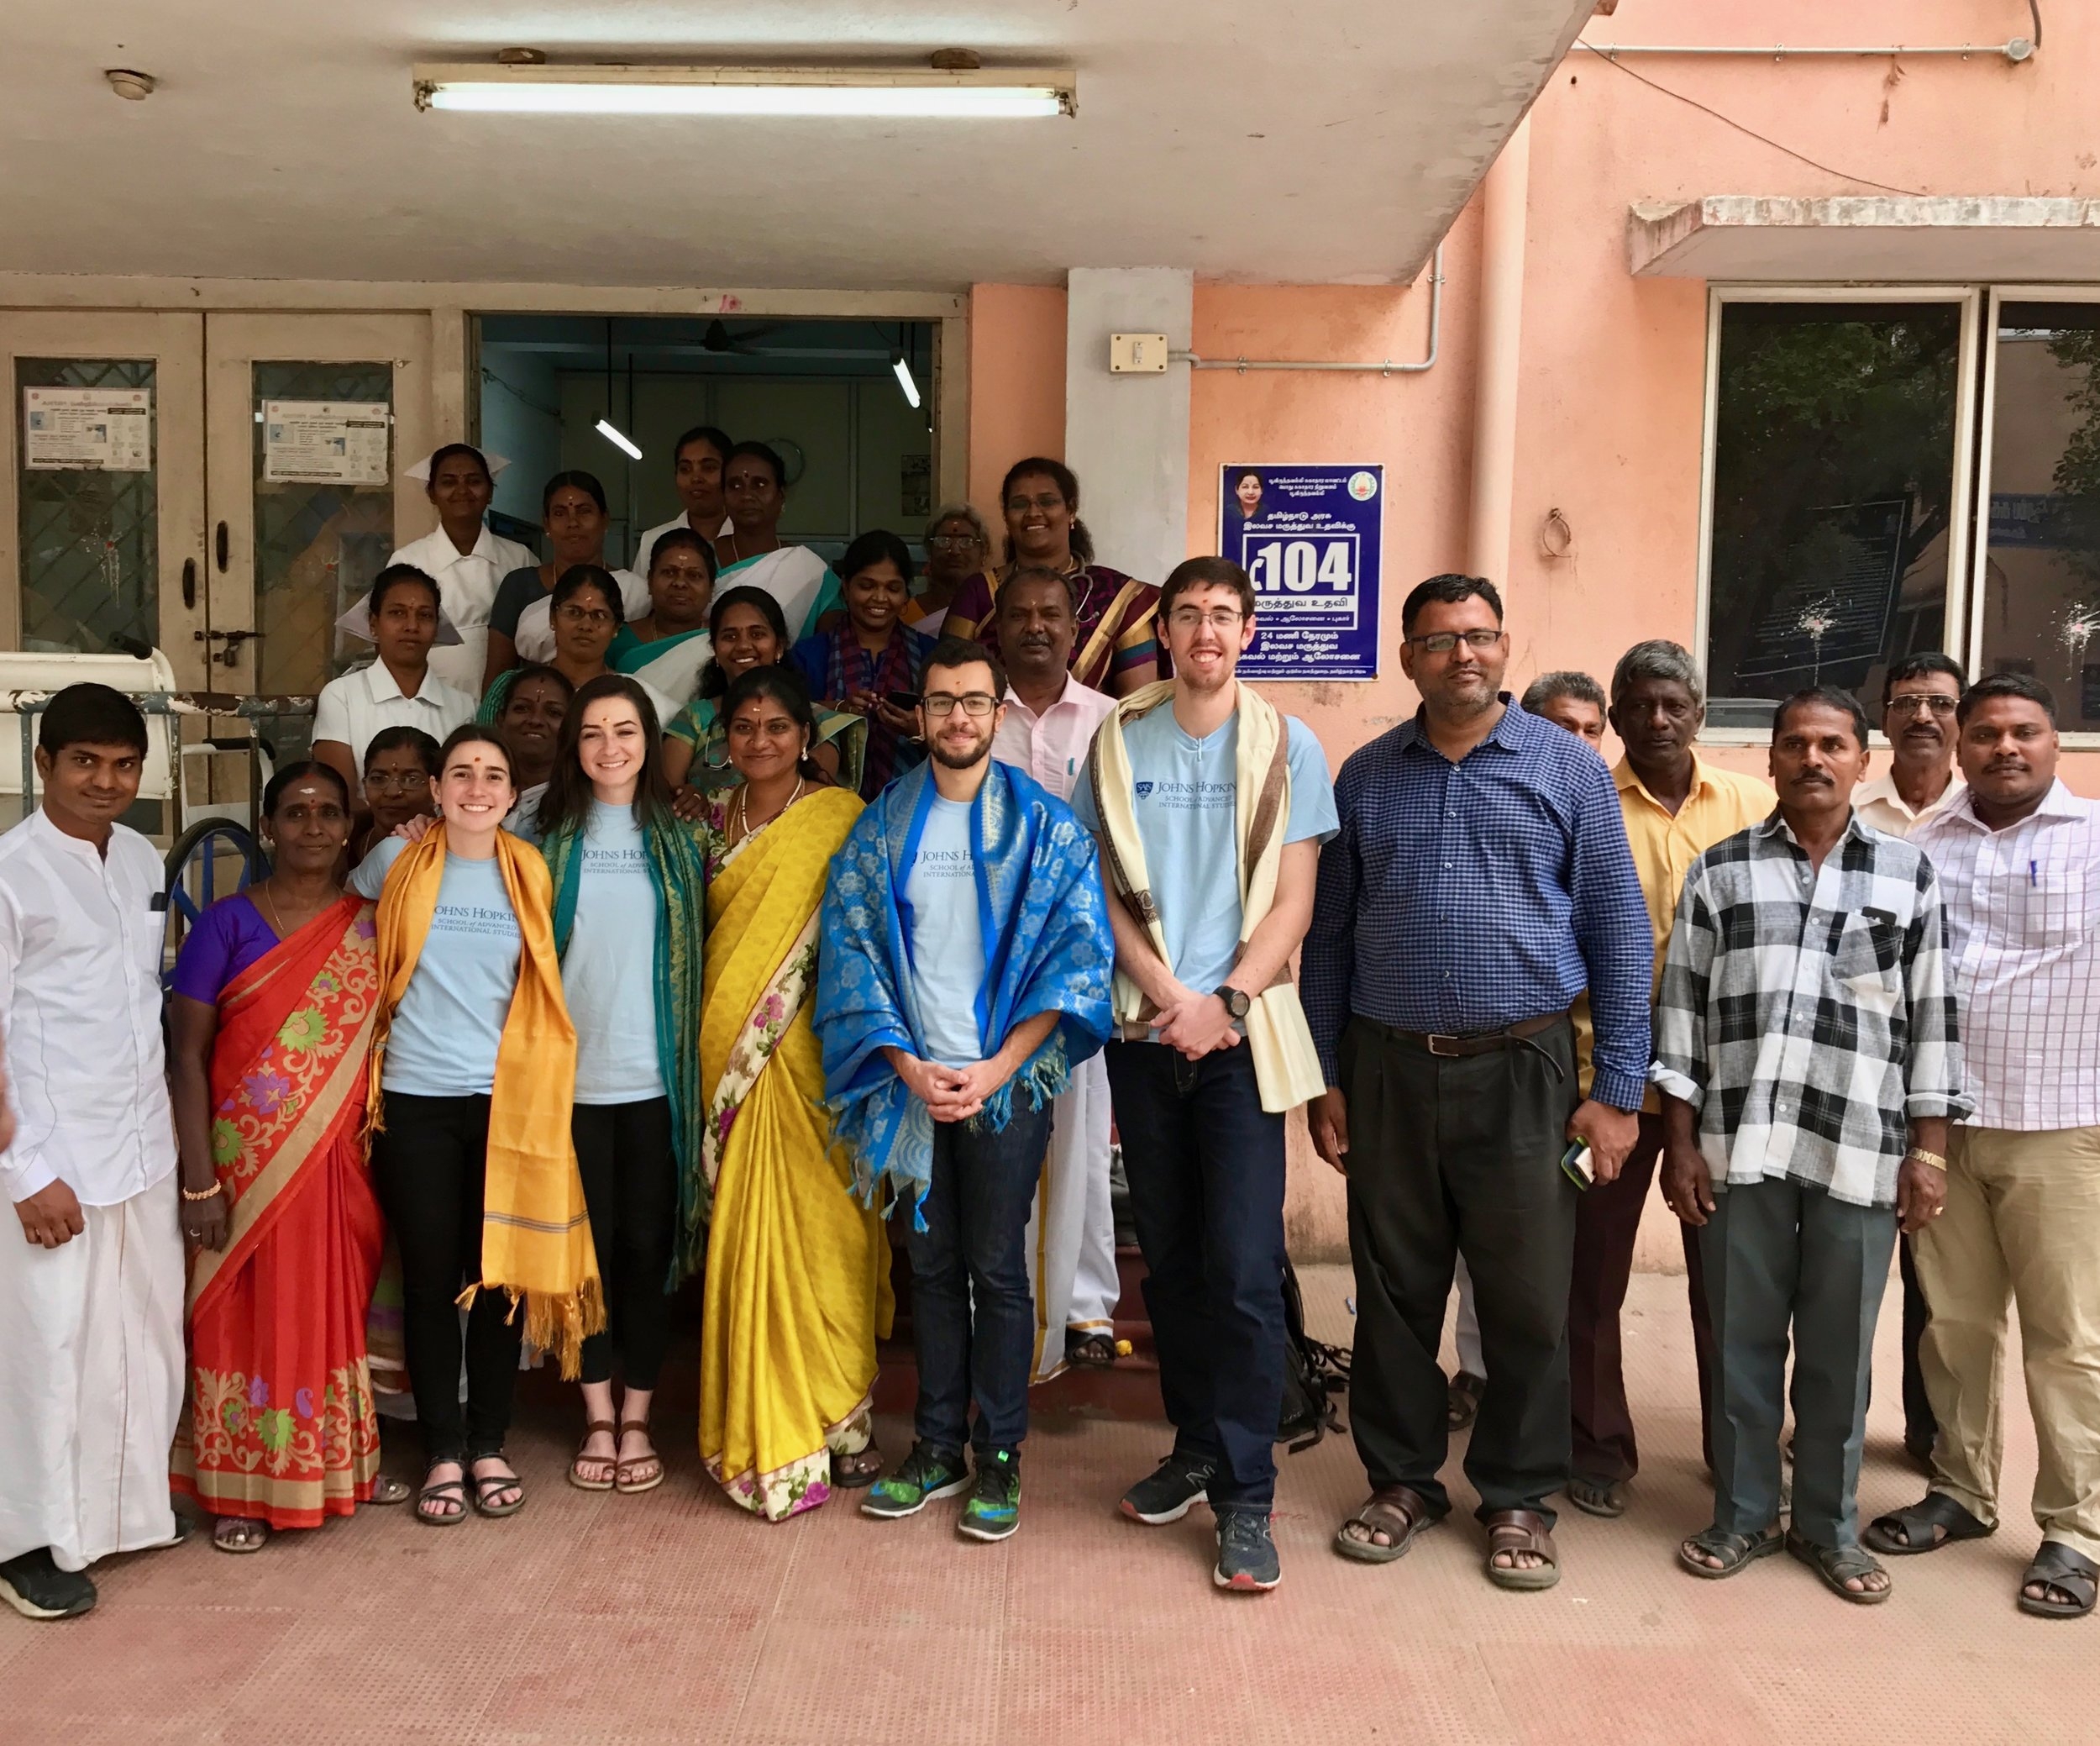  The Chennai, India IDEV Practicum Team gathers with doctors, nurses, and staff outside the Poonamallee urban primary health center (PHC)&nbsp;following interviews and observations.&nbsp;The PHC staff presented colorful scarves to the team as they we